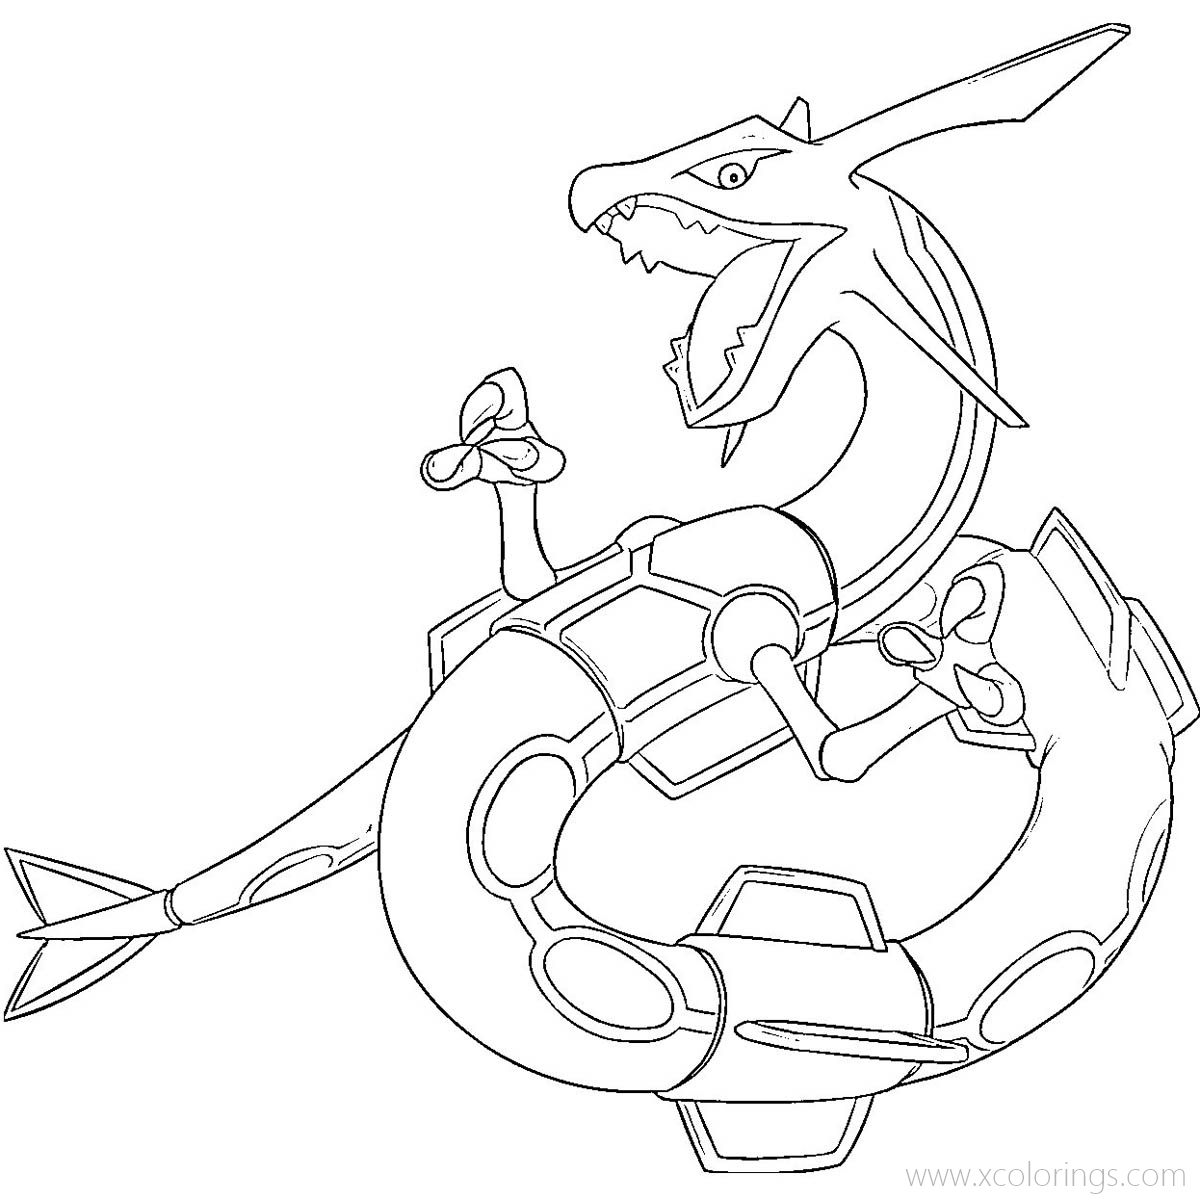 Free Rayquaza Pokemon Coloring Pages Outline printable